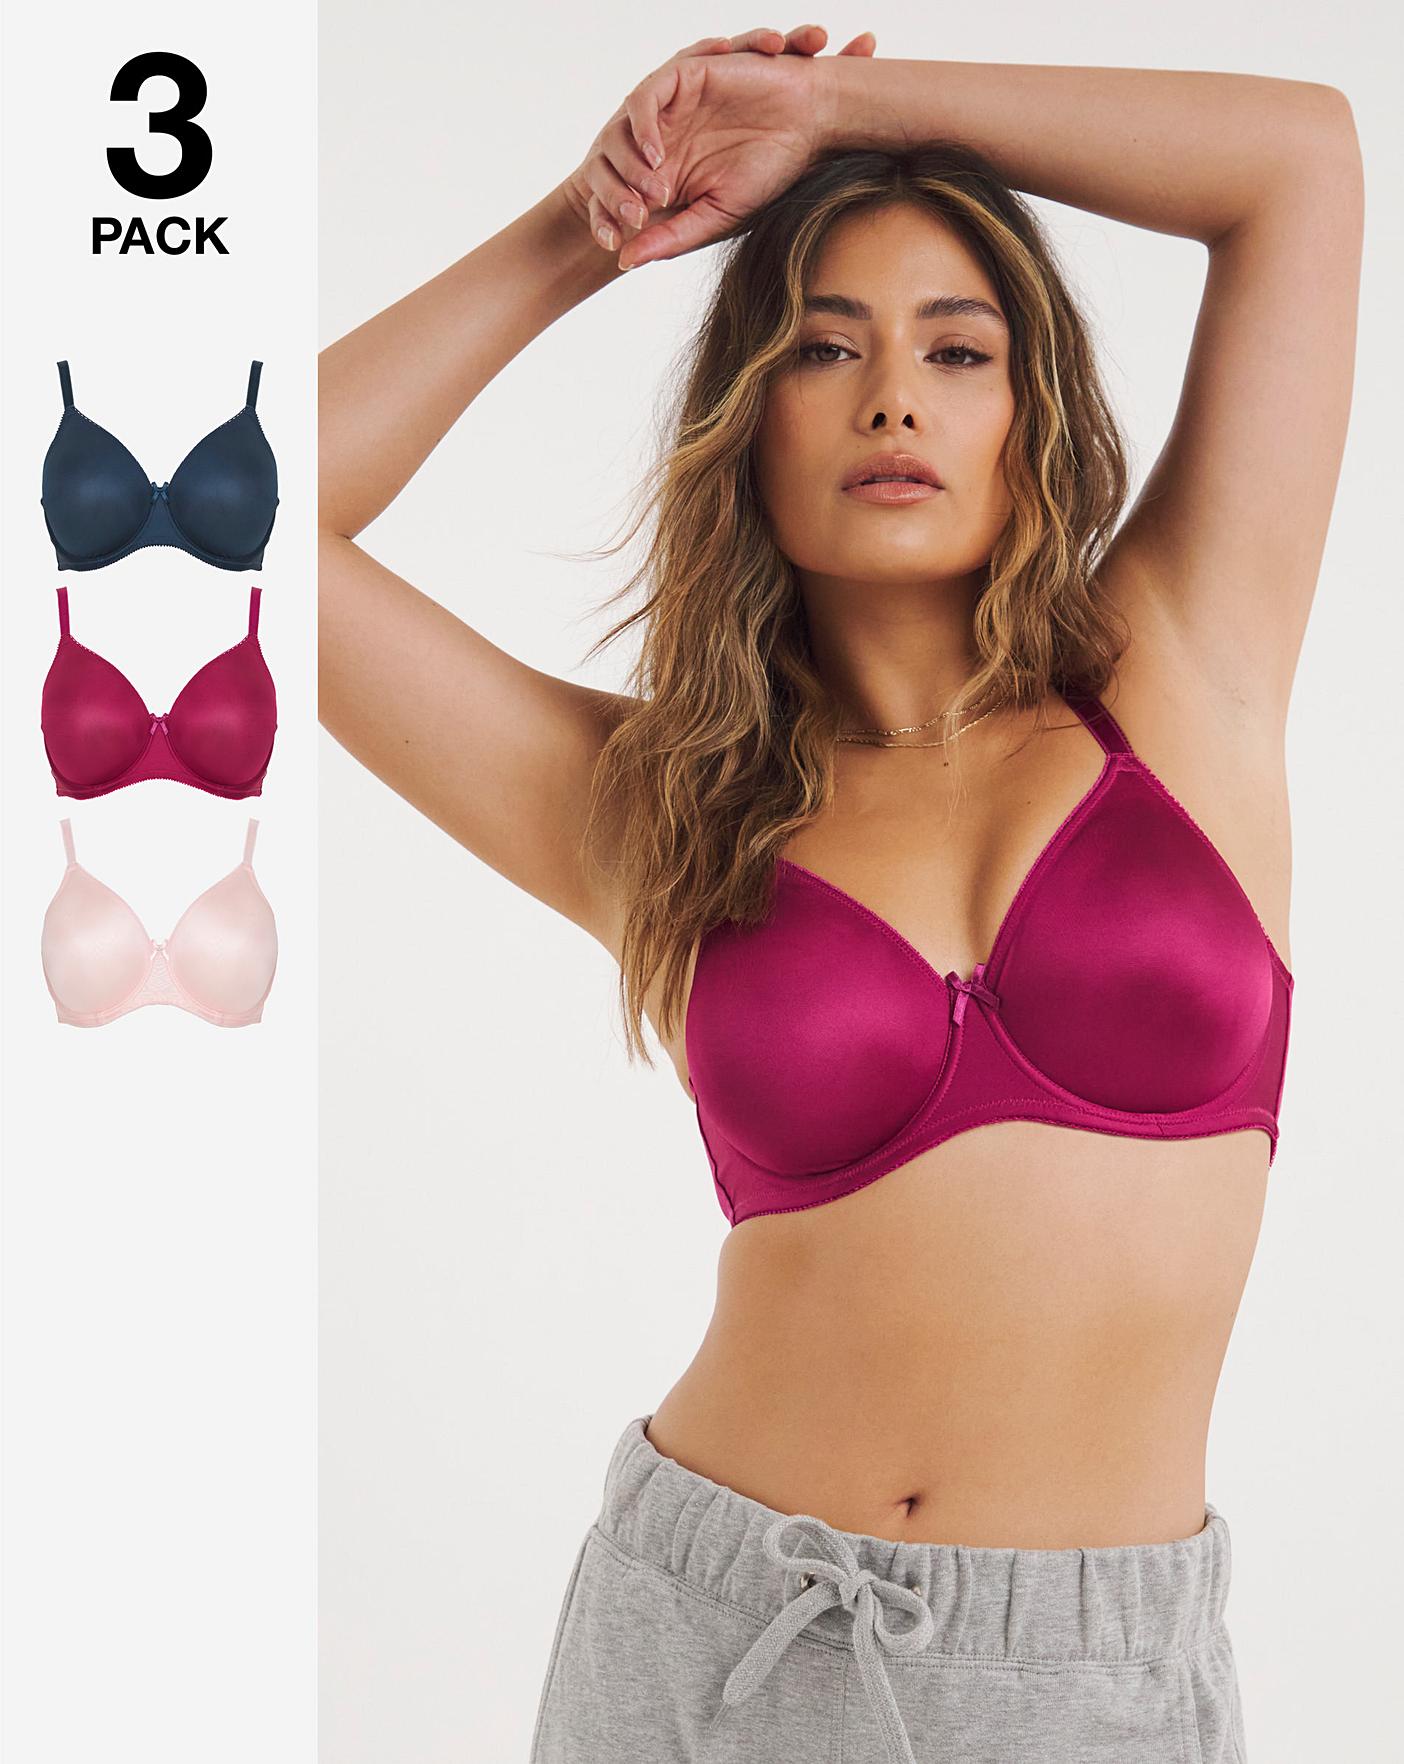 Wired Bras, Everyday, Comfort Touch Well Being Wired Padded Bras